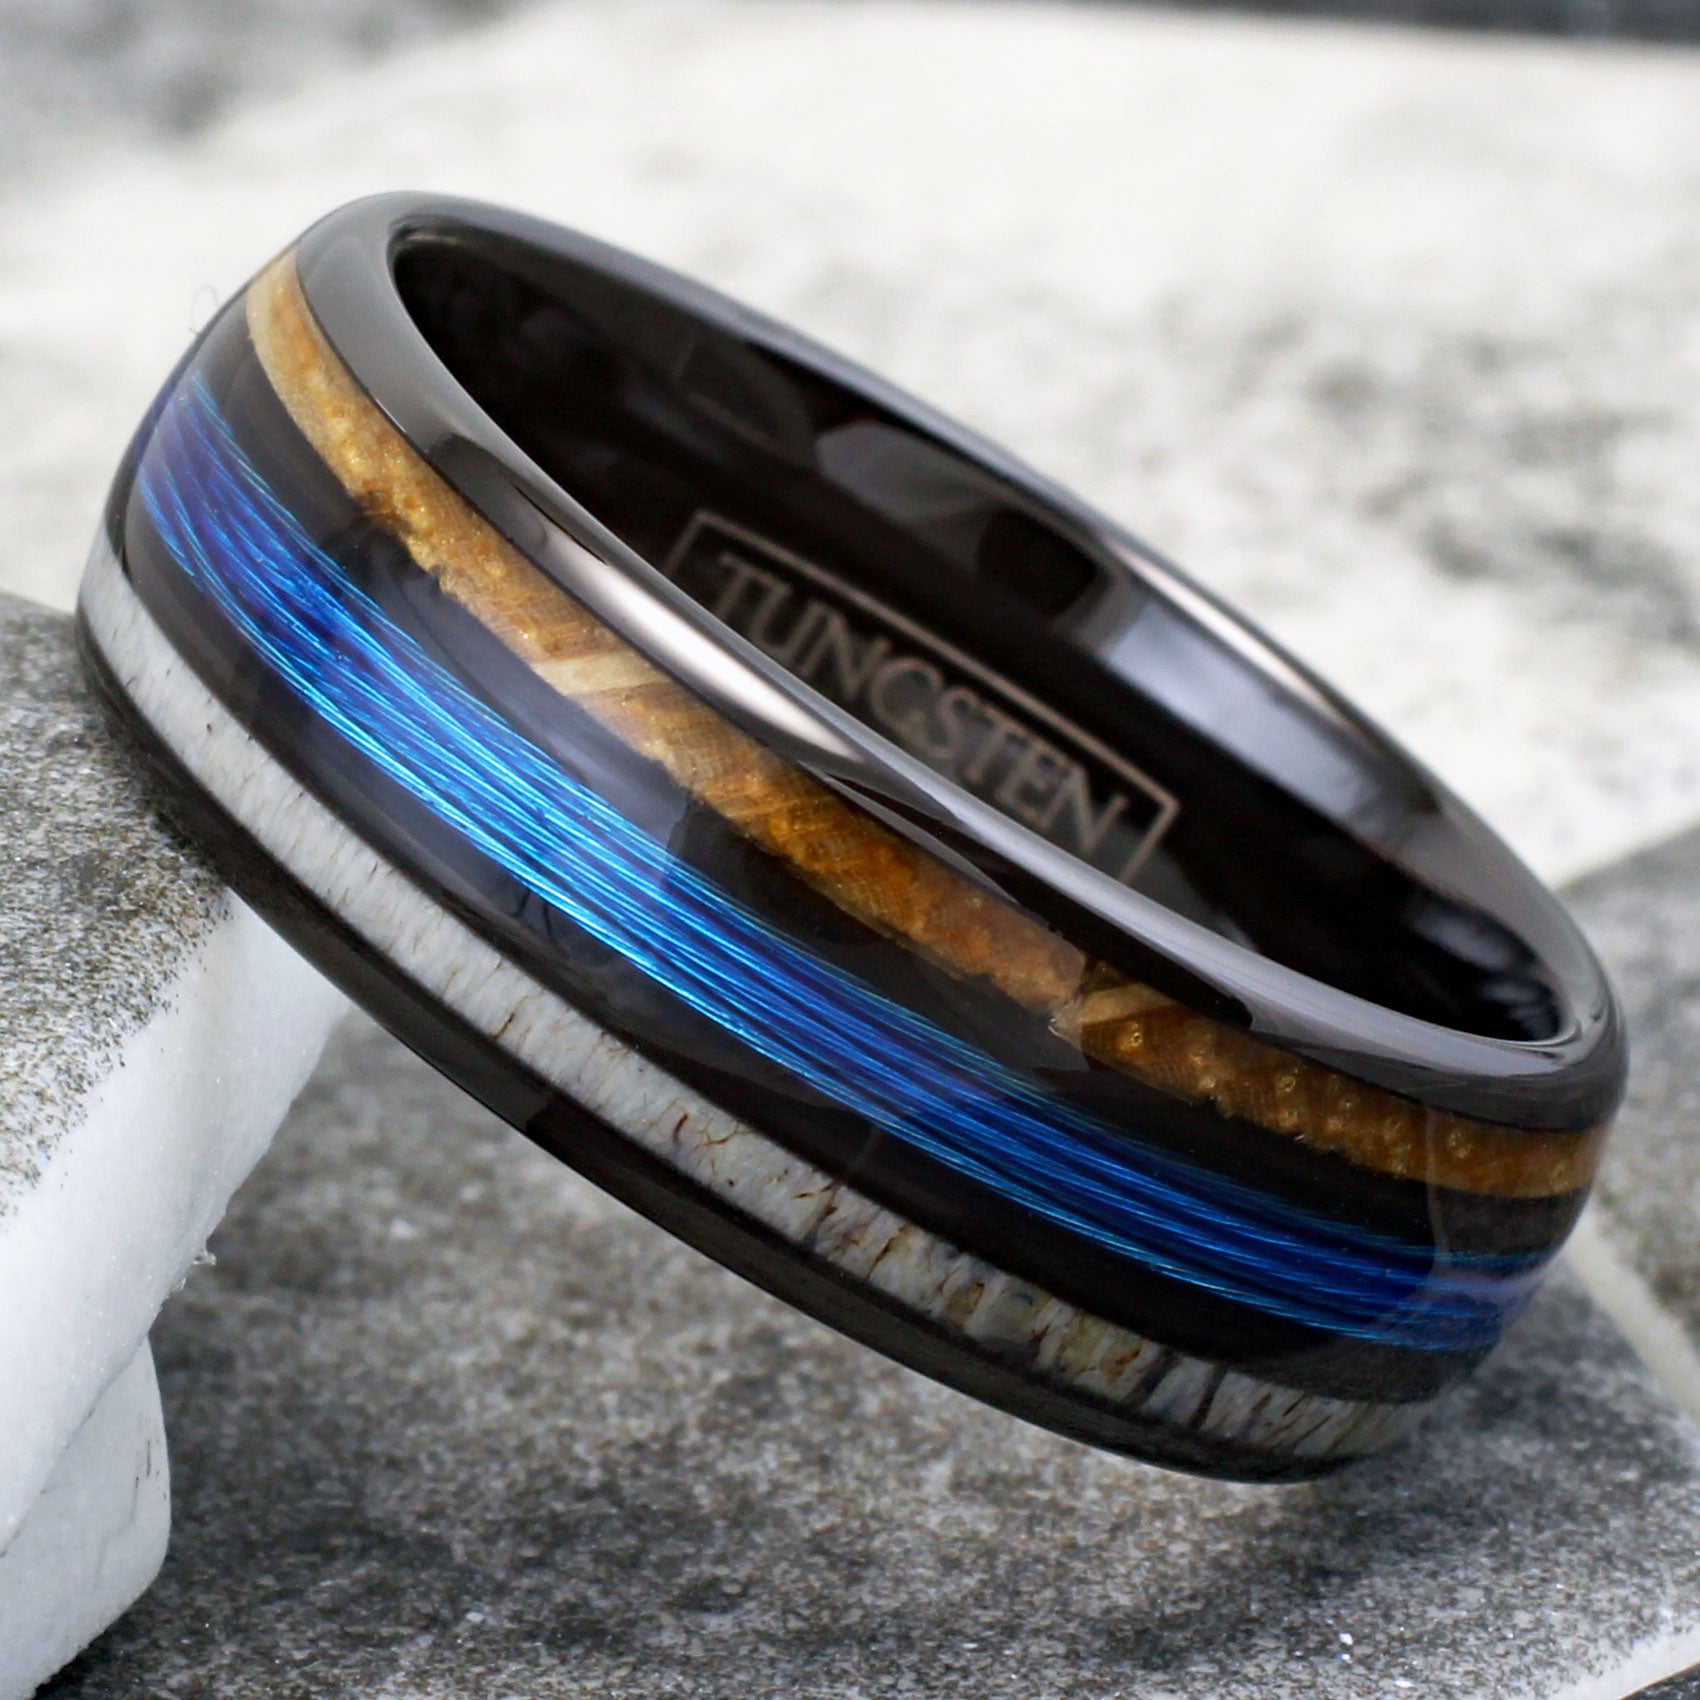 Magnificent Polished Black Tungsten Low Dome Ring with Bright Blue Real  Fishing Line Between Whiskey Barrel Oak Wood and Deer Antler Inlays.